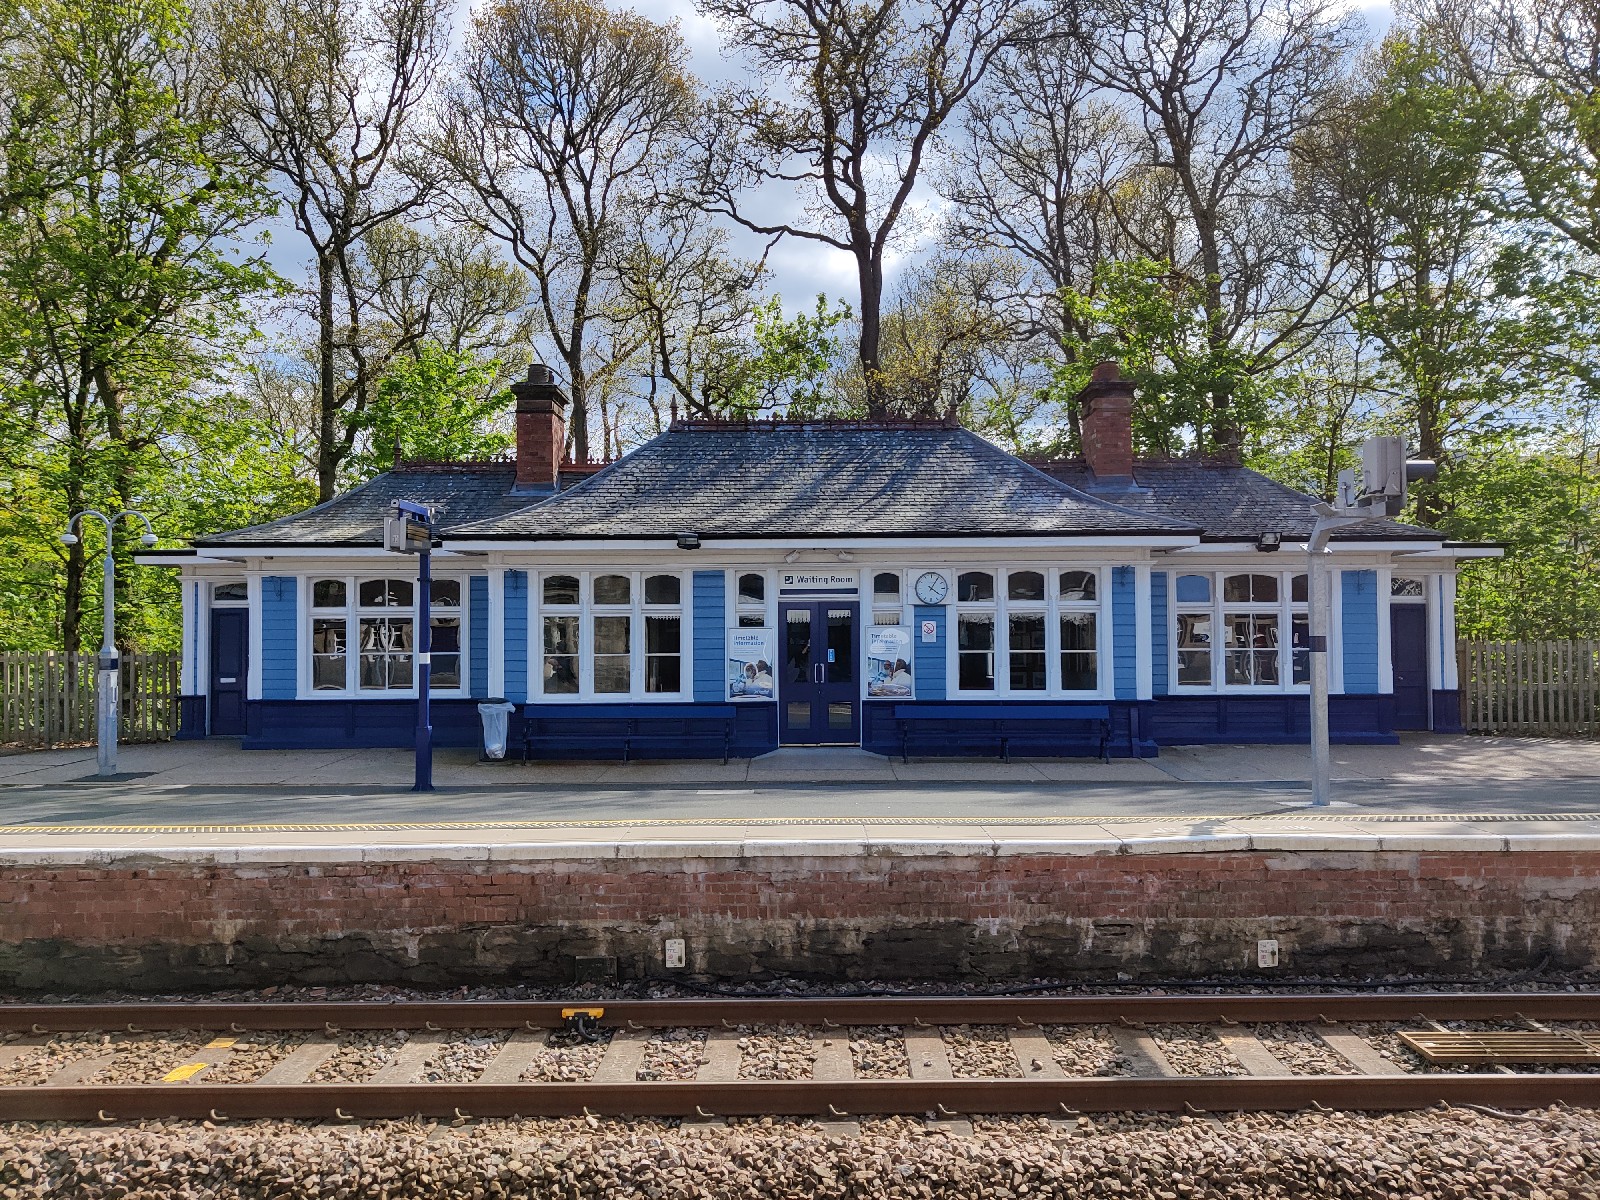 A cute blue painted waiting room on the platform at the railway station